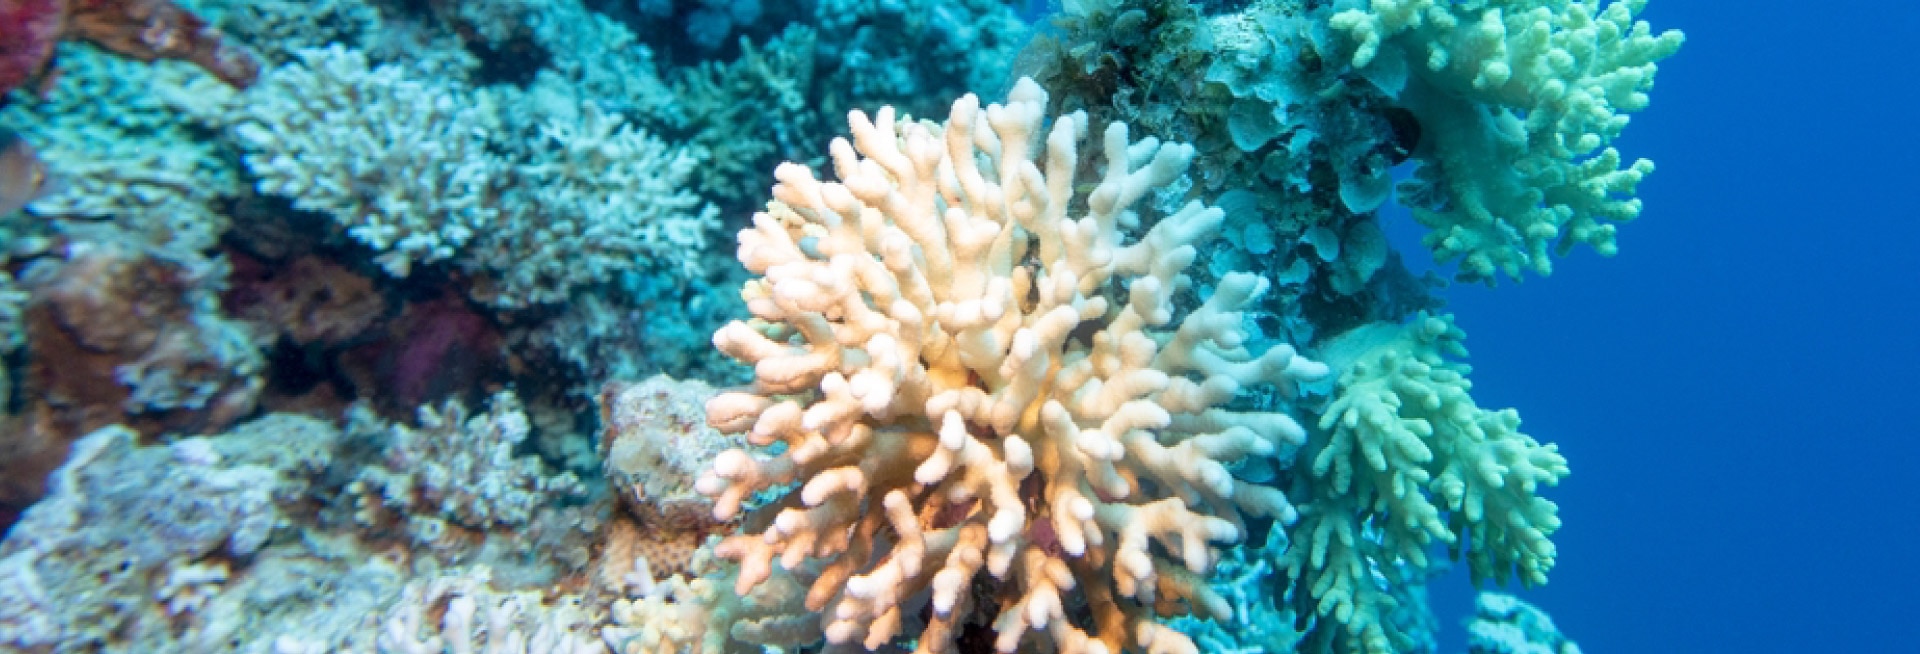 A photo of a coral